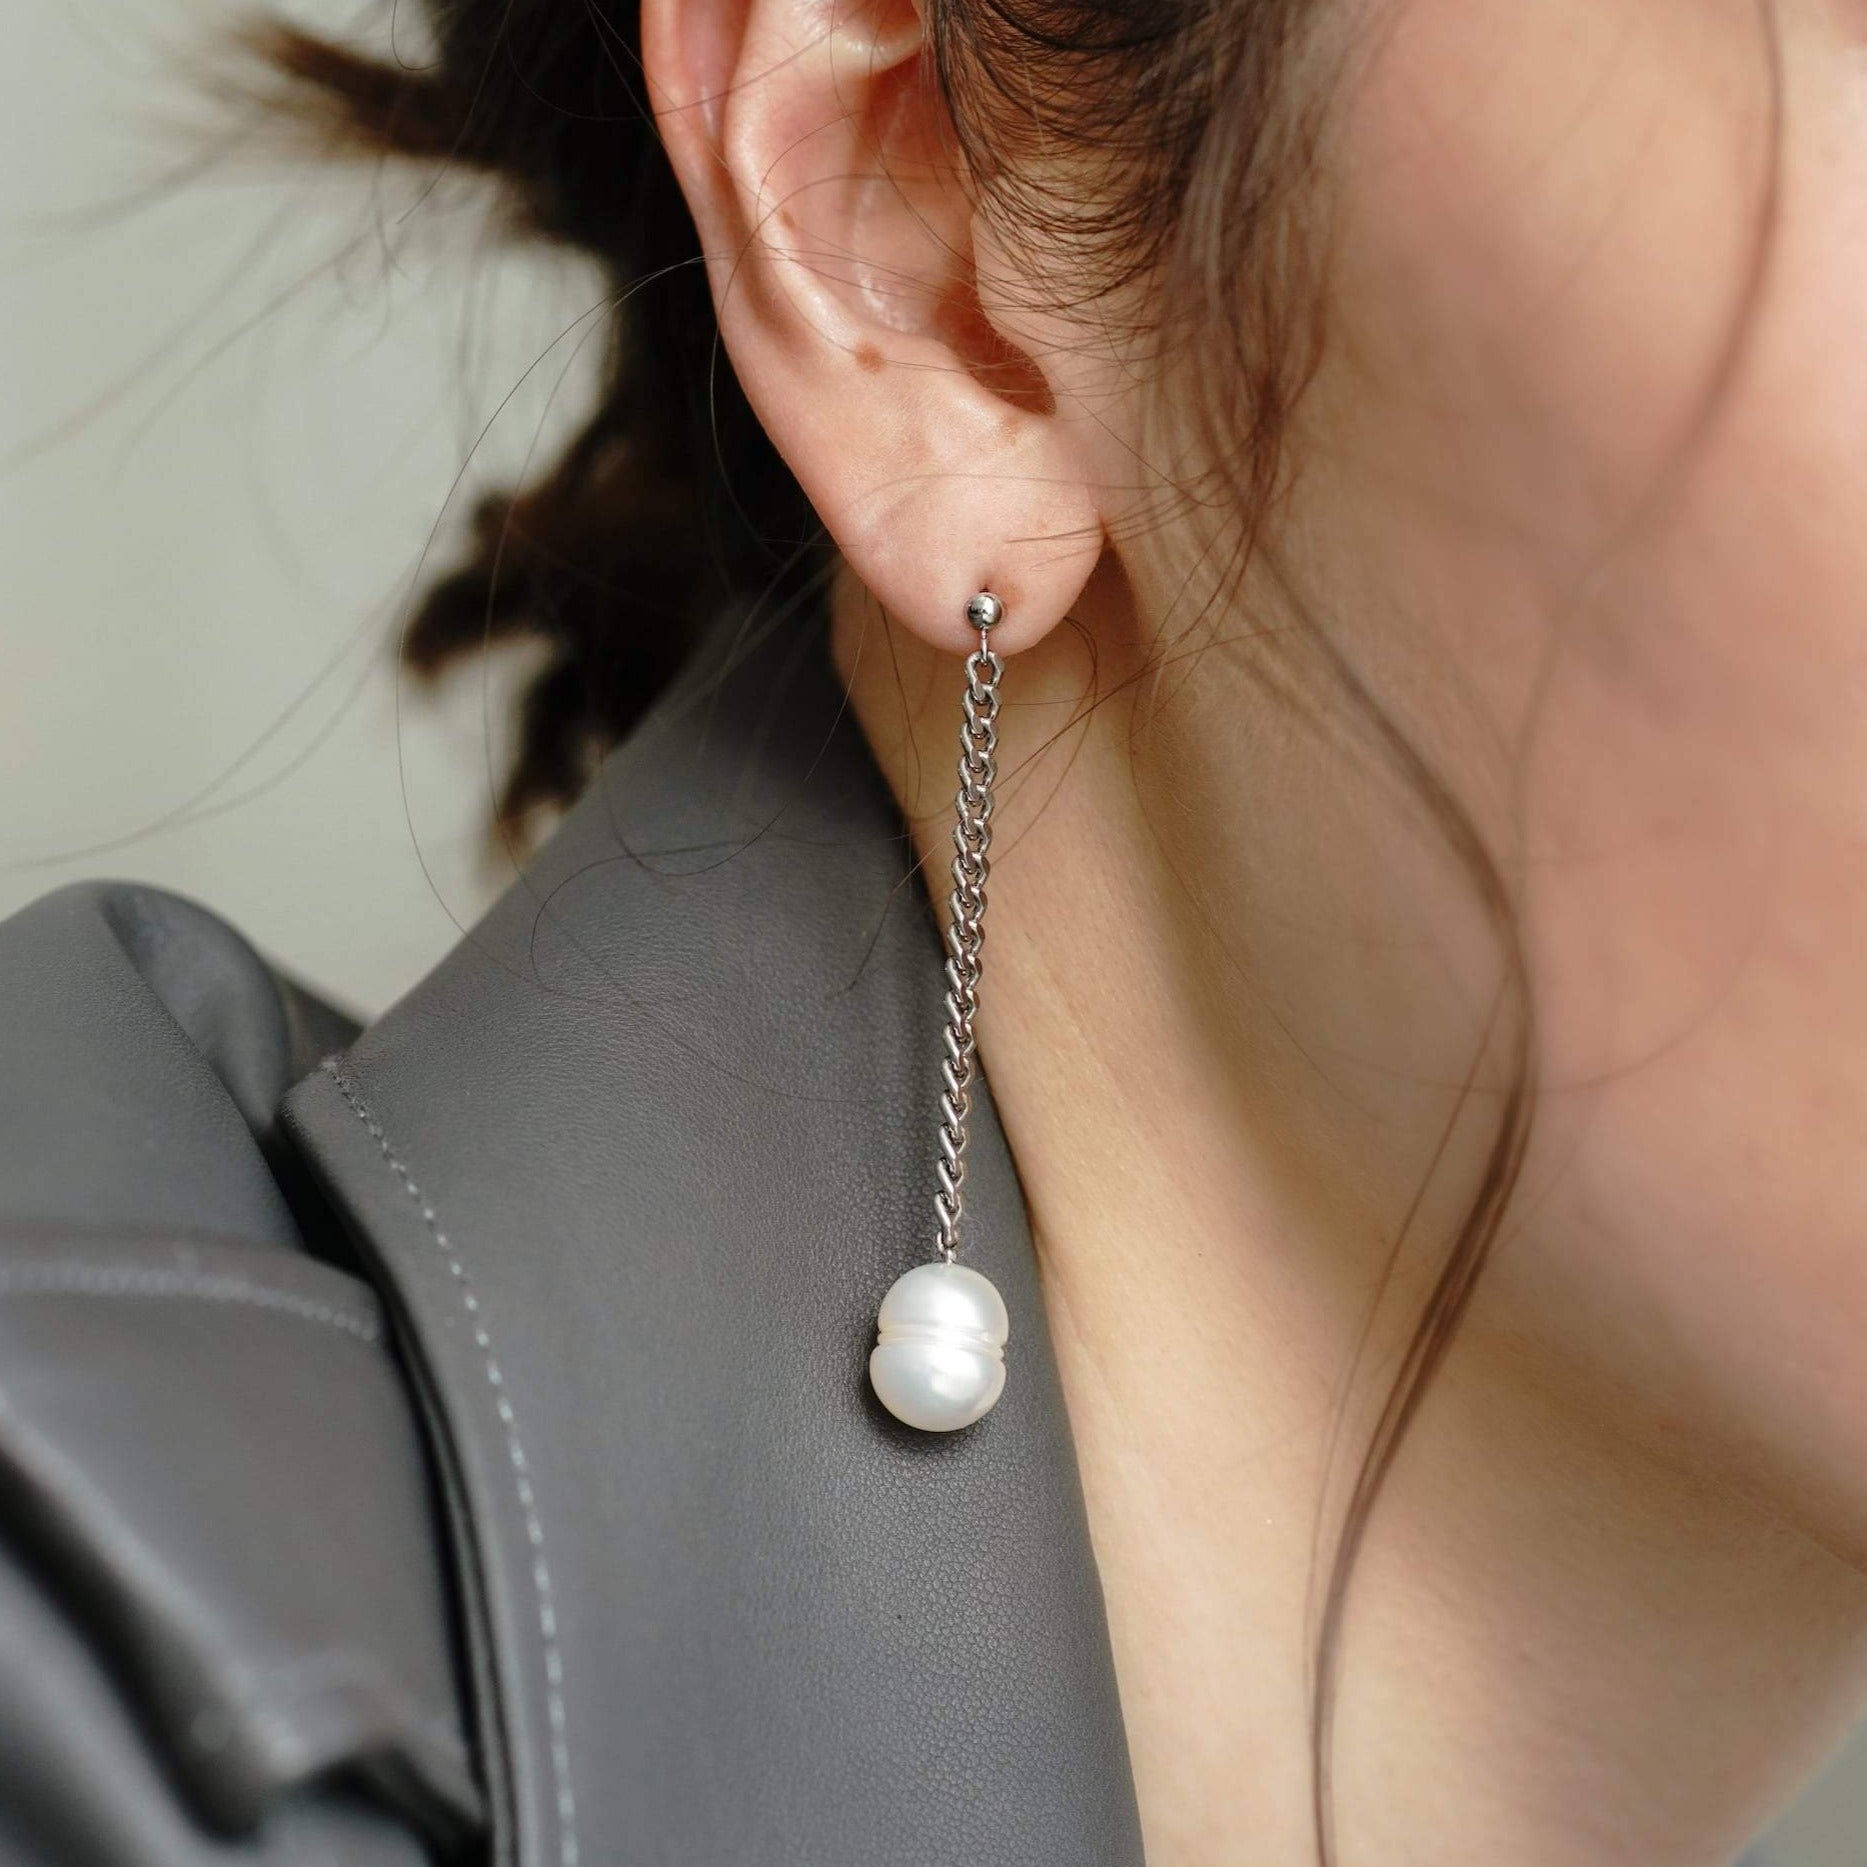 Fashionable lady in leather jacket and earrings with Dangling Pearl Piercing.